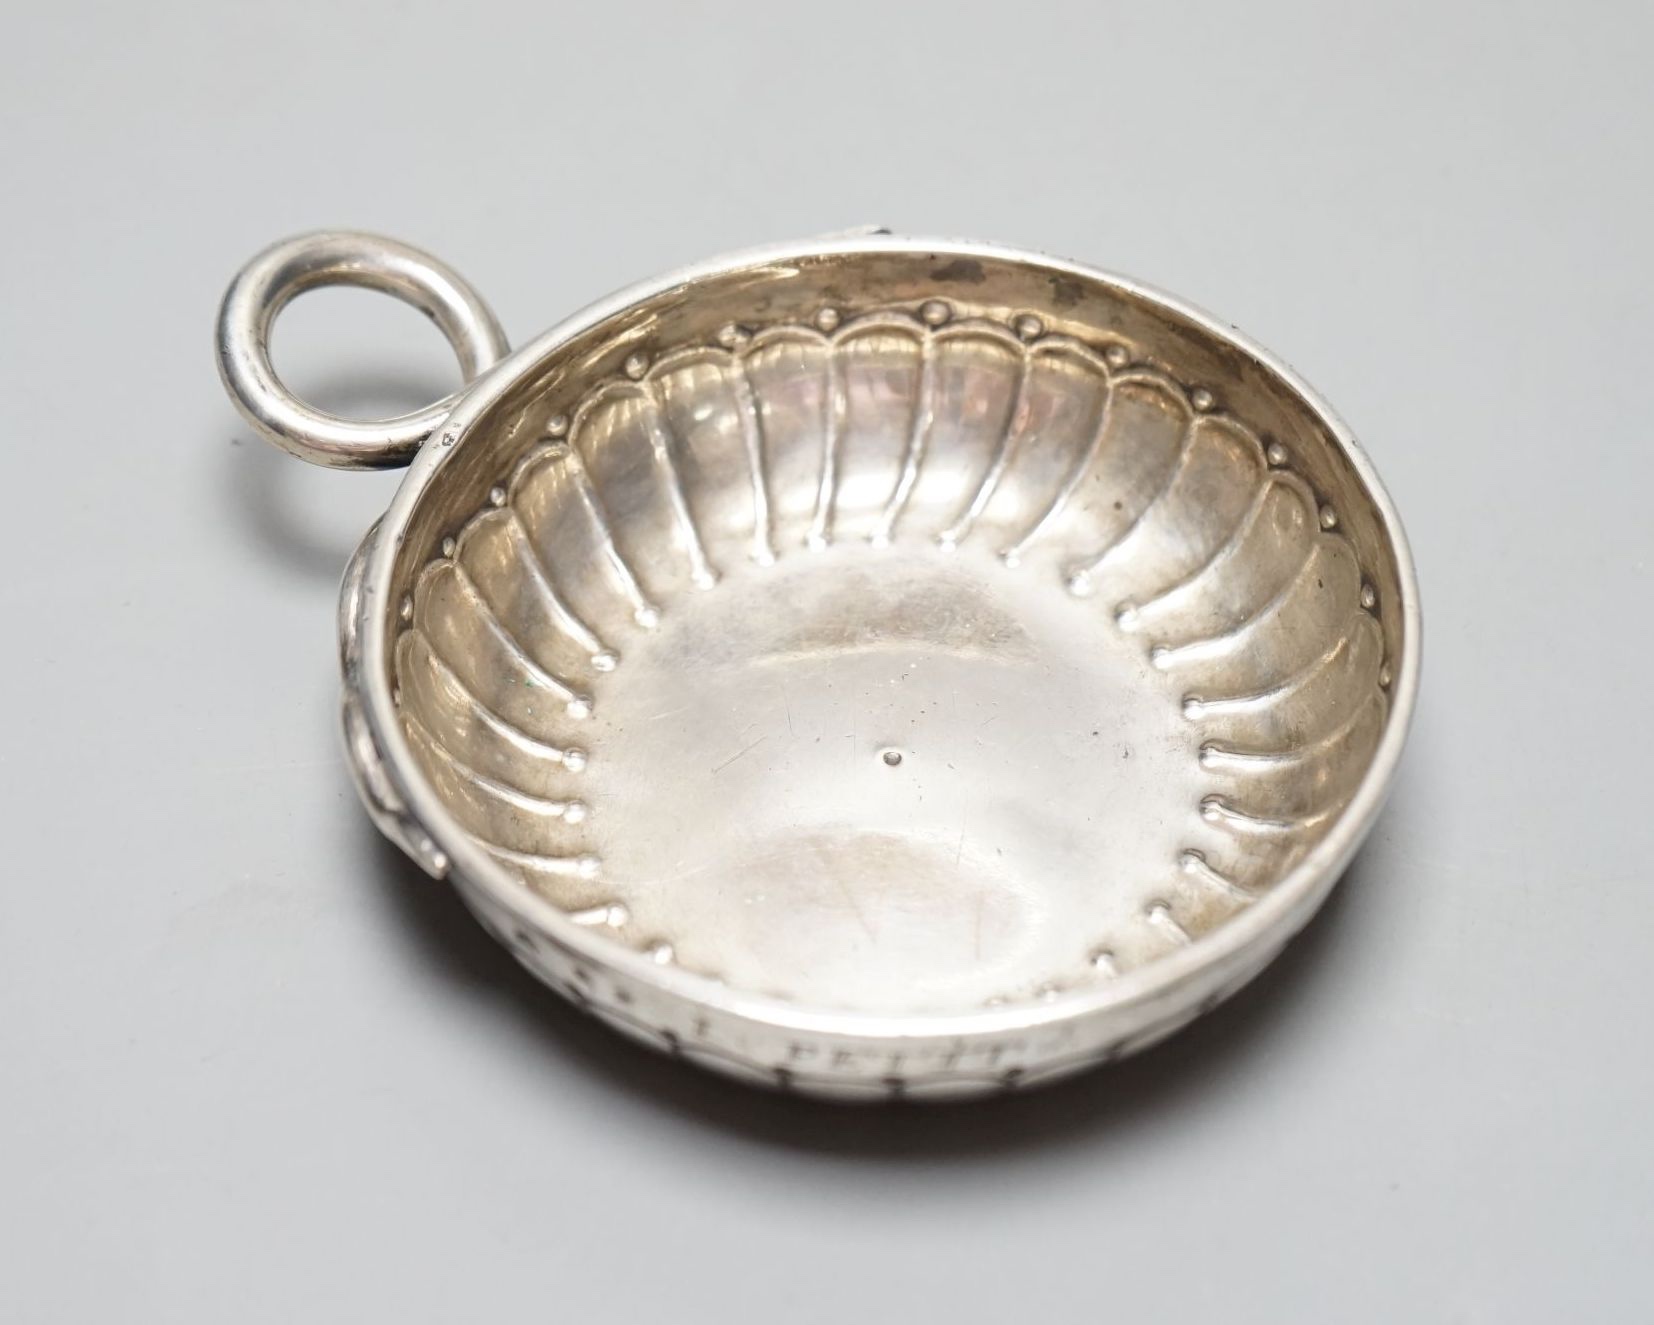 A late 18th/early 19th century French white metal taste vin, with engraved inscription and ring